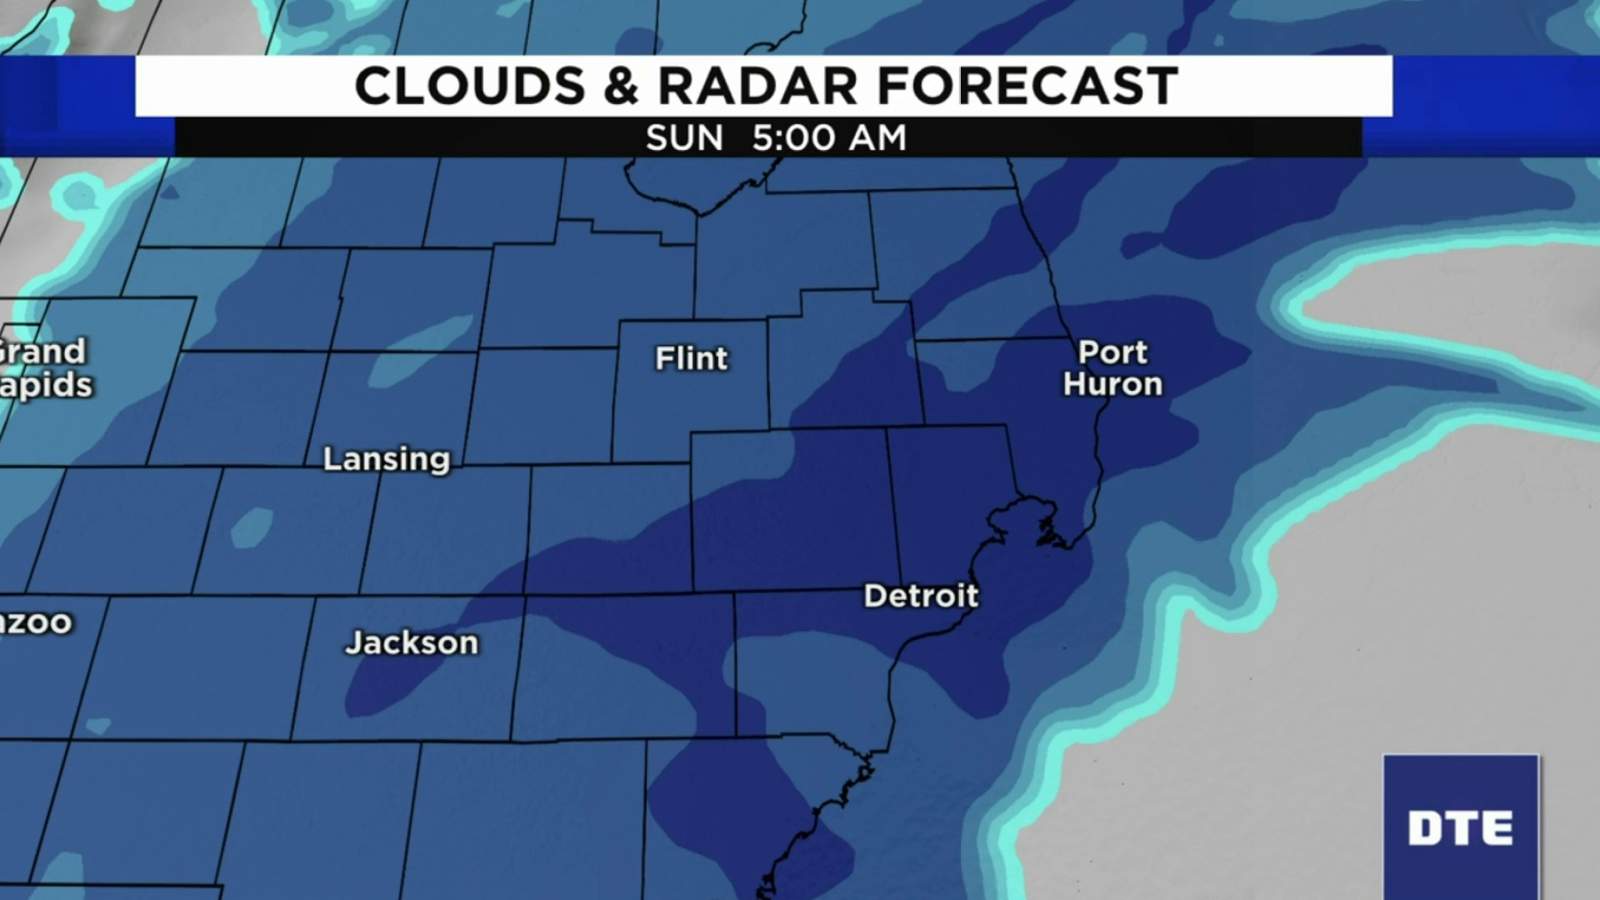 Metro Detroit weather: Several inches of snow fall before Arctic cold front, more snow this weekend